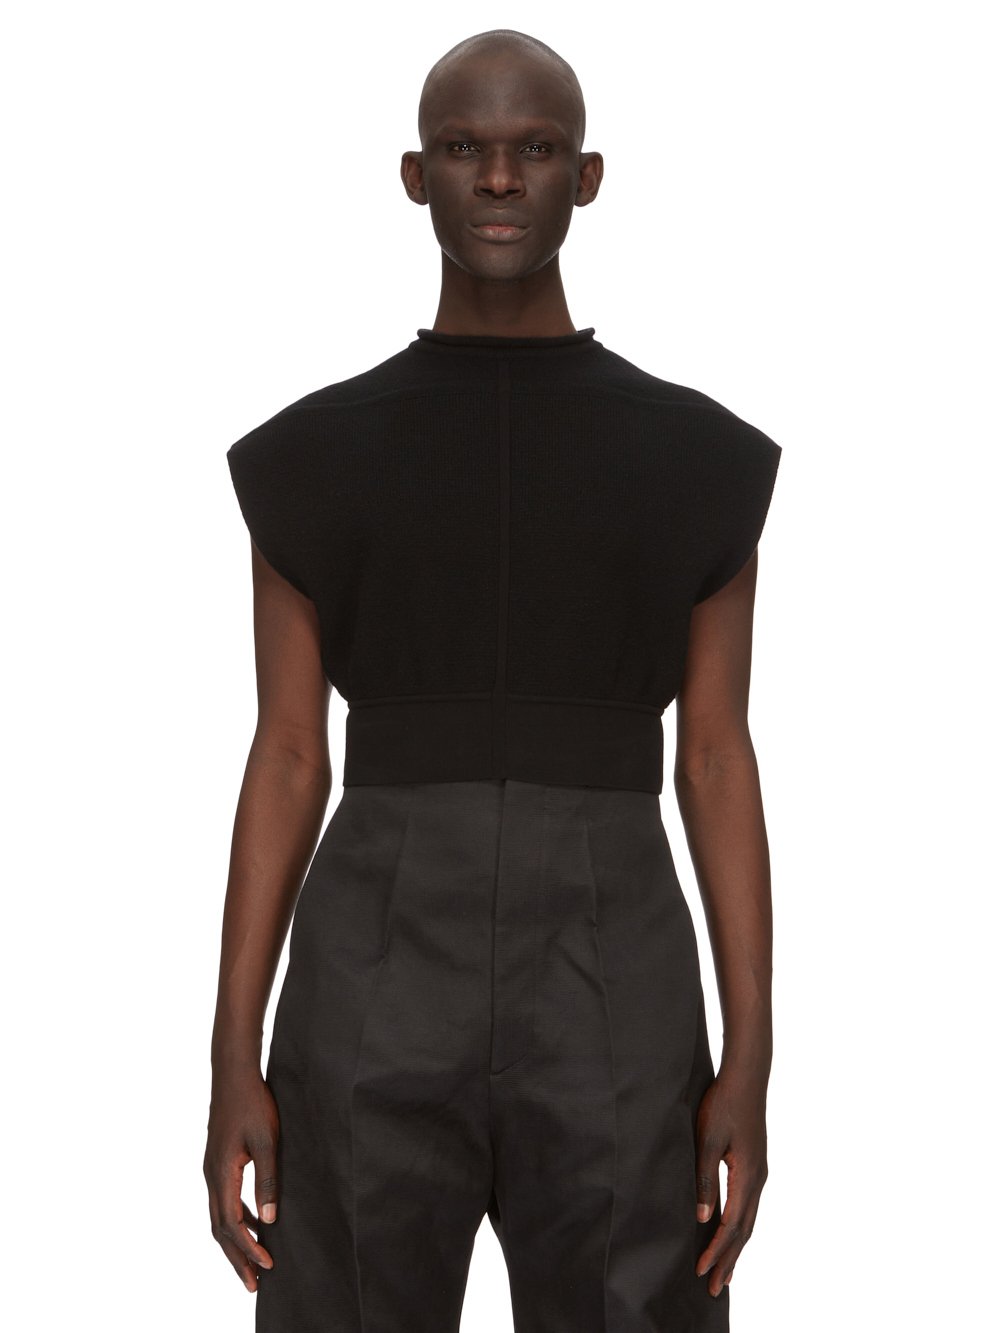 RICK OWENS FW23 LUXOR RUNWAY CROPPED TOP IN BLACK RECYCLED CASHMERE